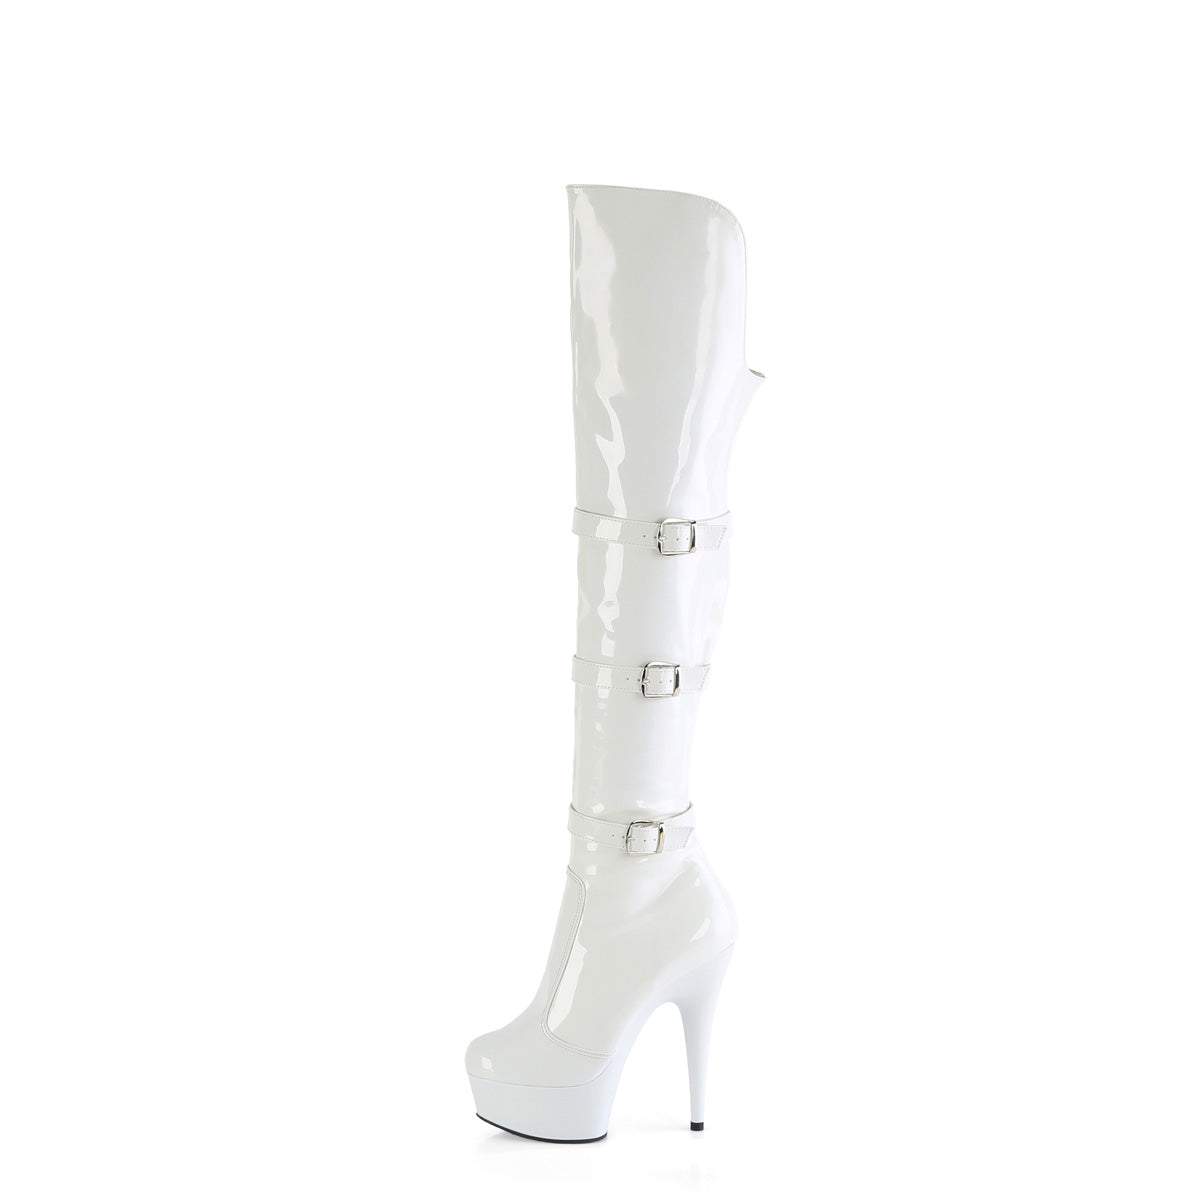 white over the knee boots - Delight-3018